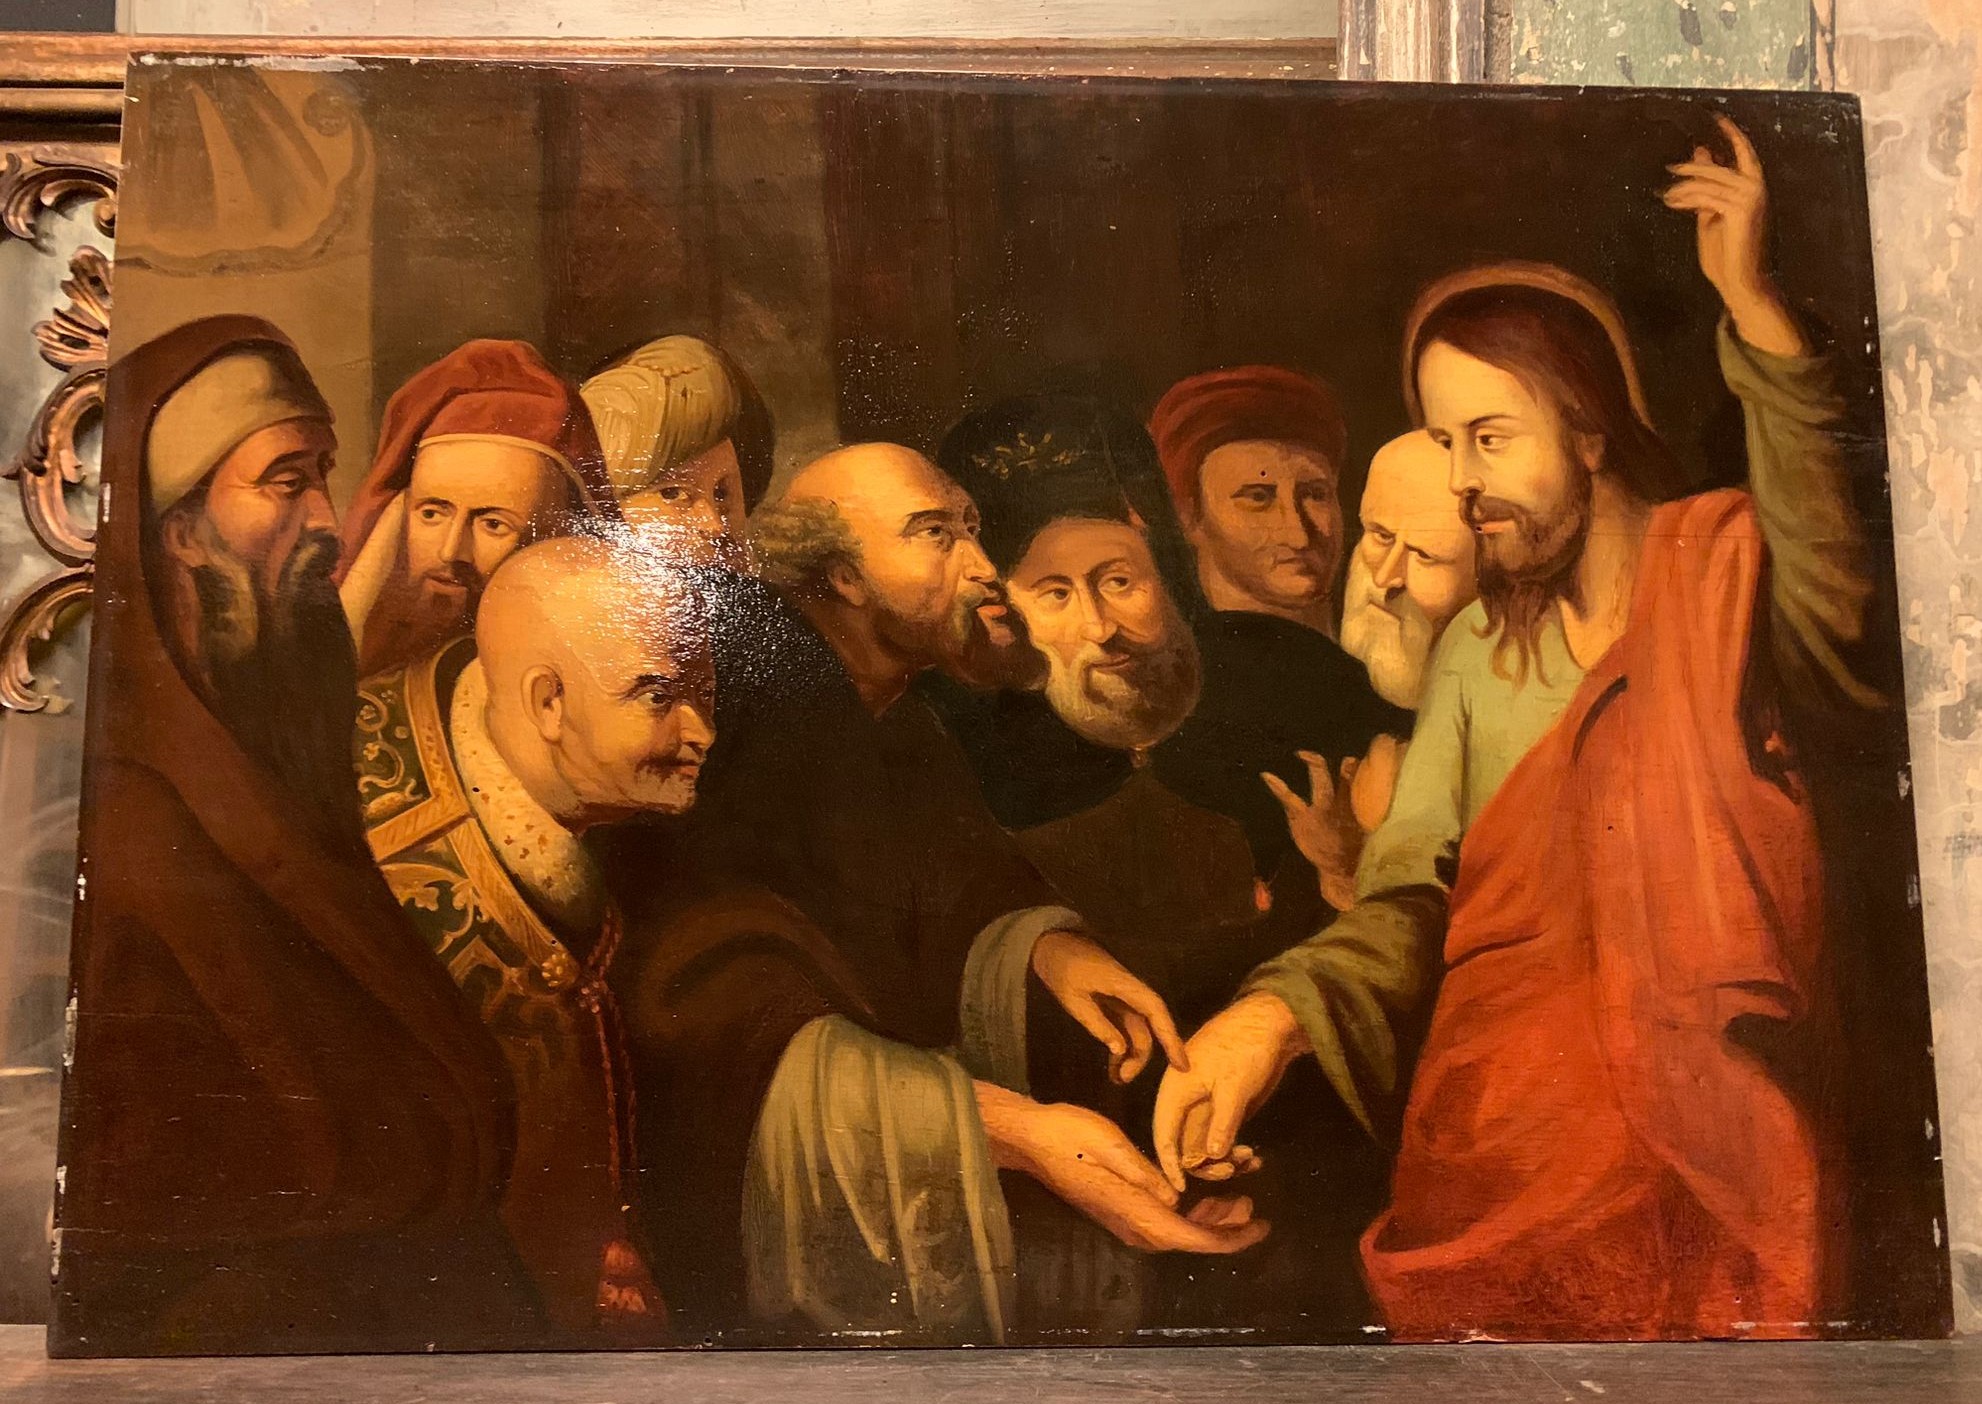 A PAN389 - Religious painting, 18th century, measuring W 76 x H 54 cm